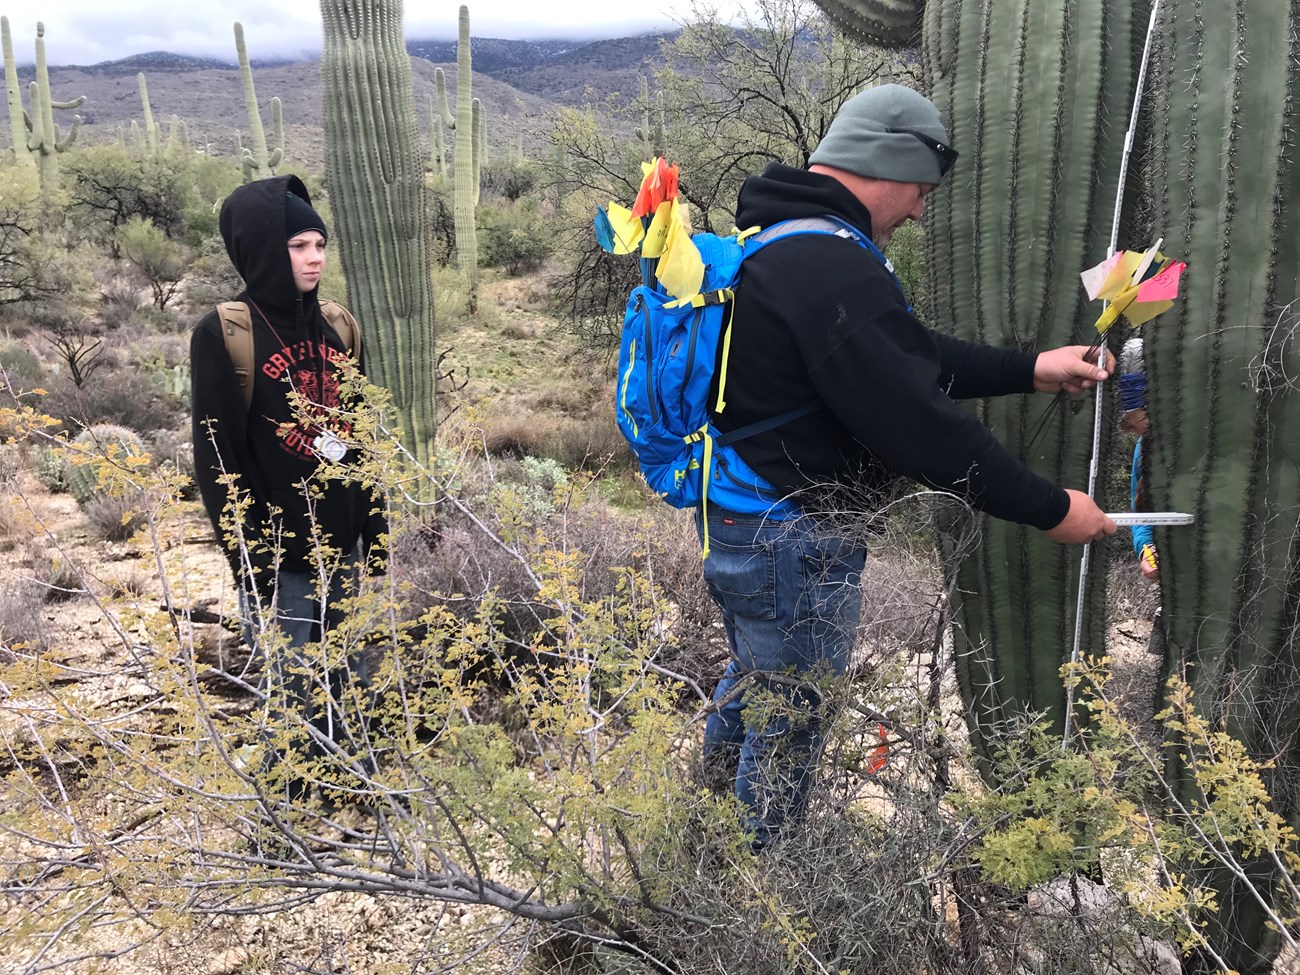 Man using a white folding ruler to measure the height of a saguaro